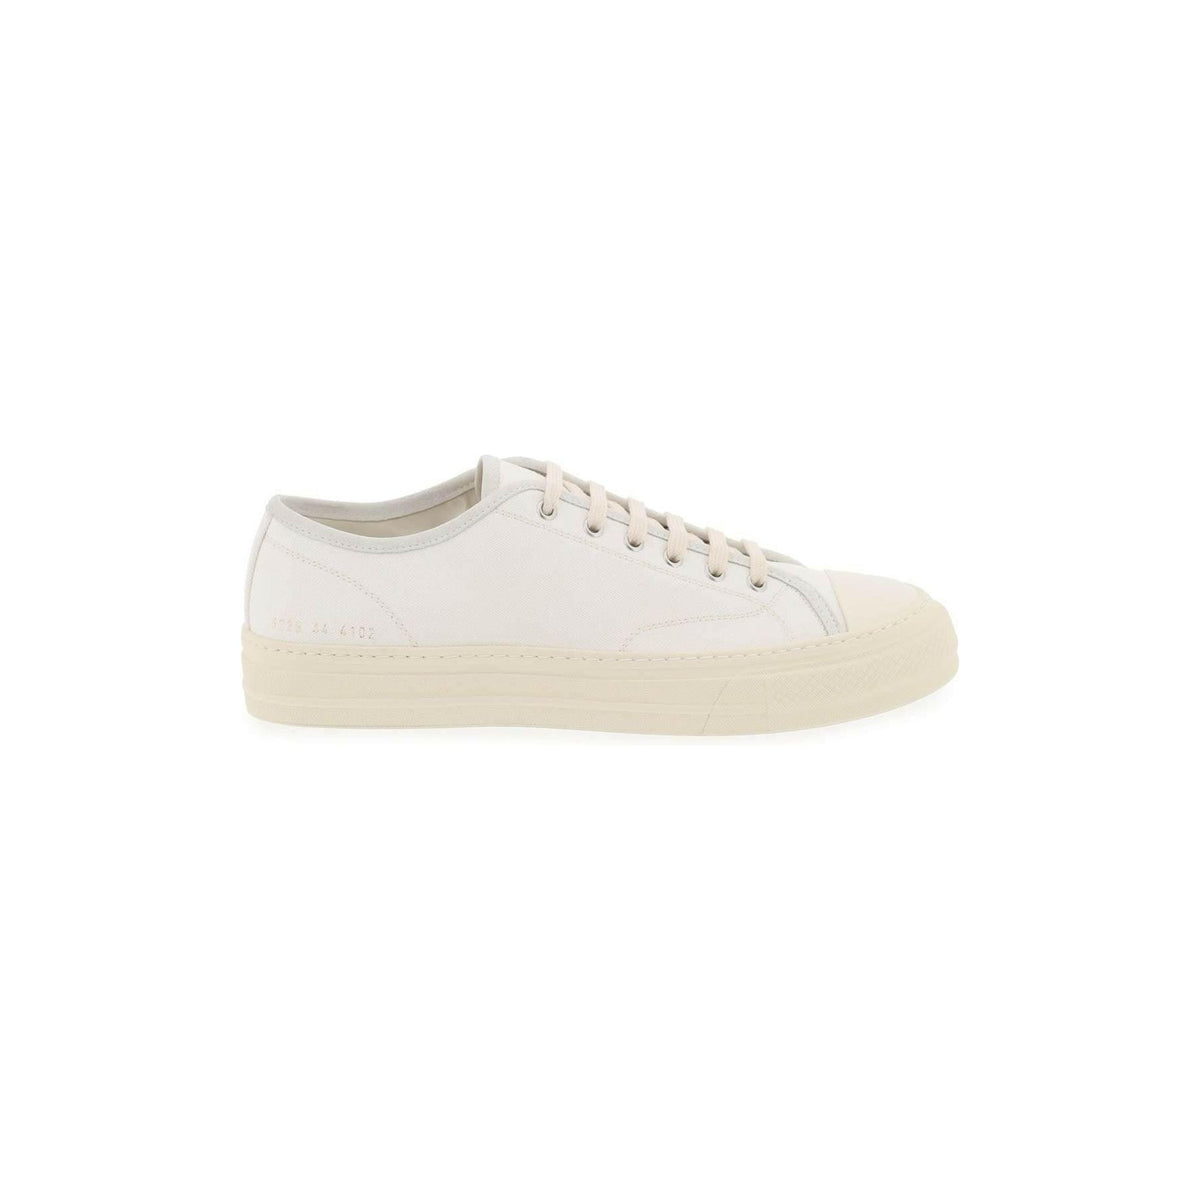 Off-White Tournament Canvas Sneakers COMMON PROJECTS JOHN JULIA.